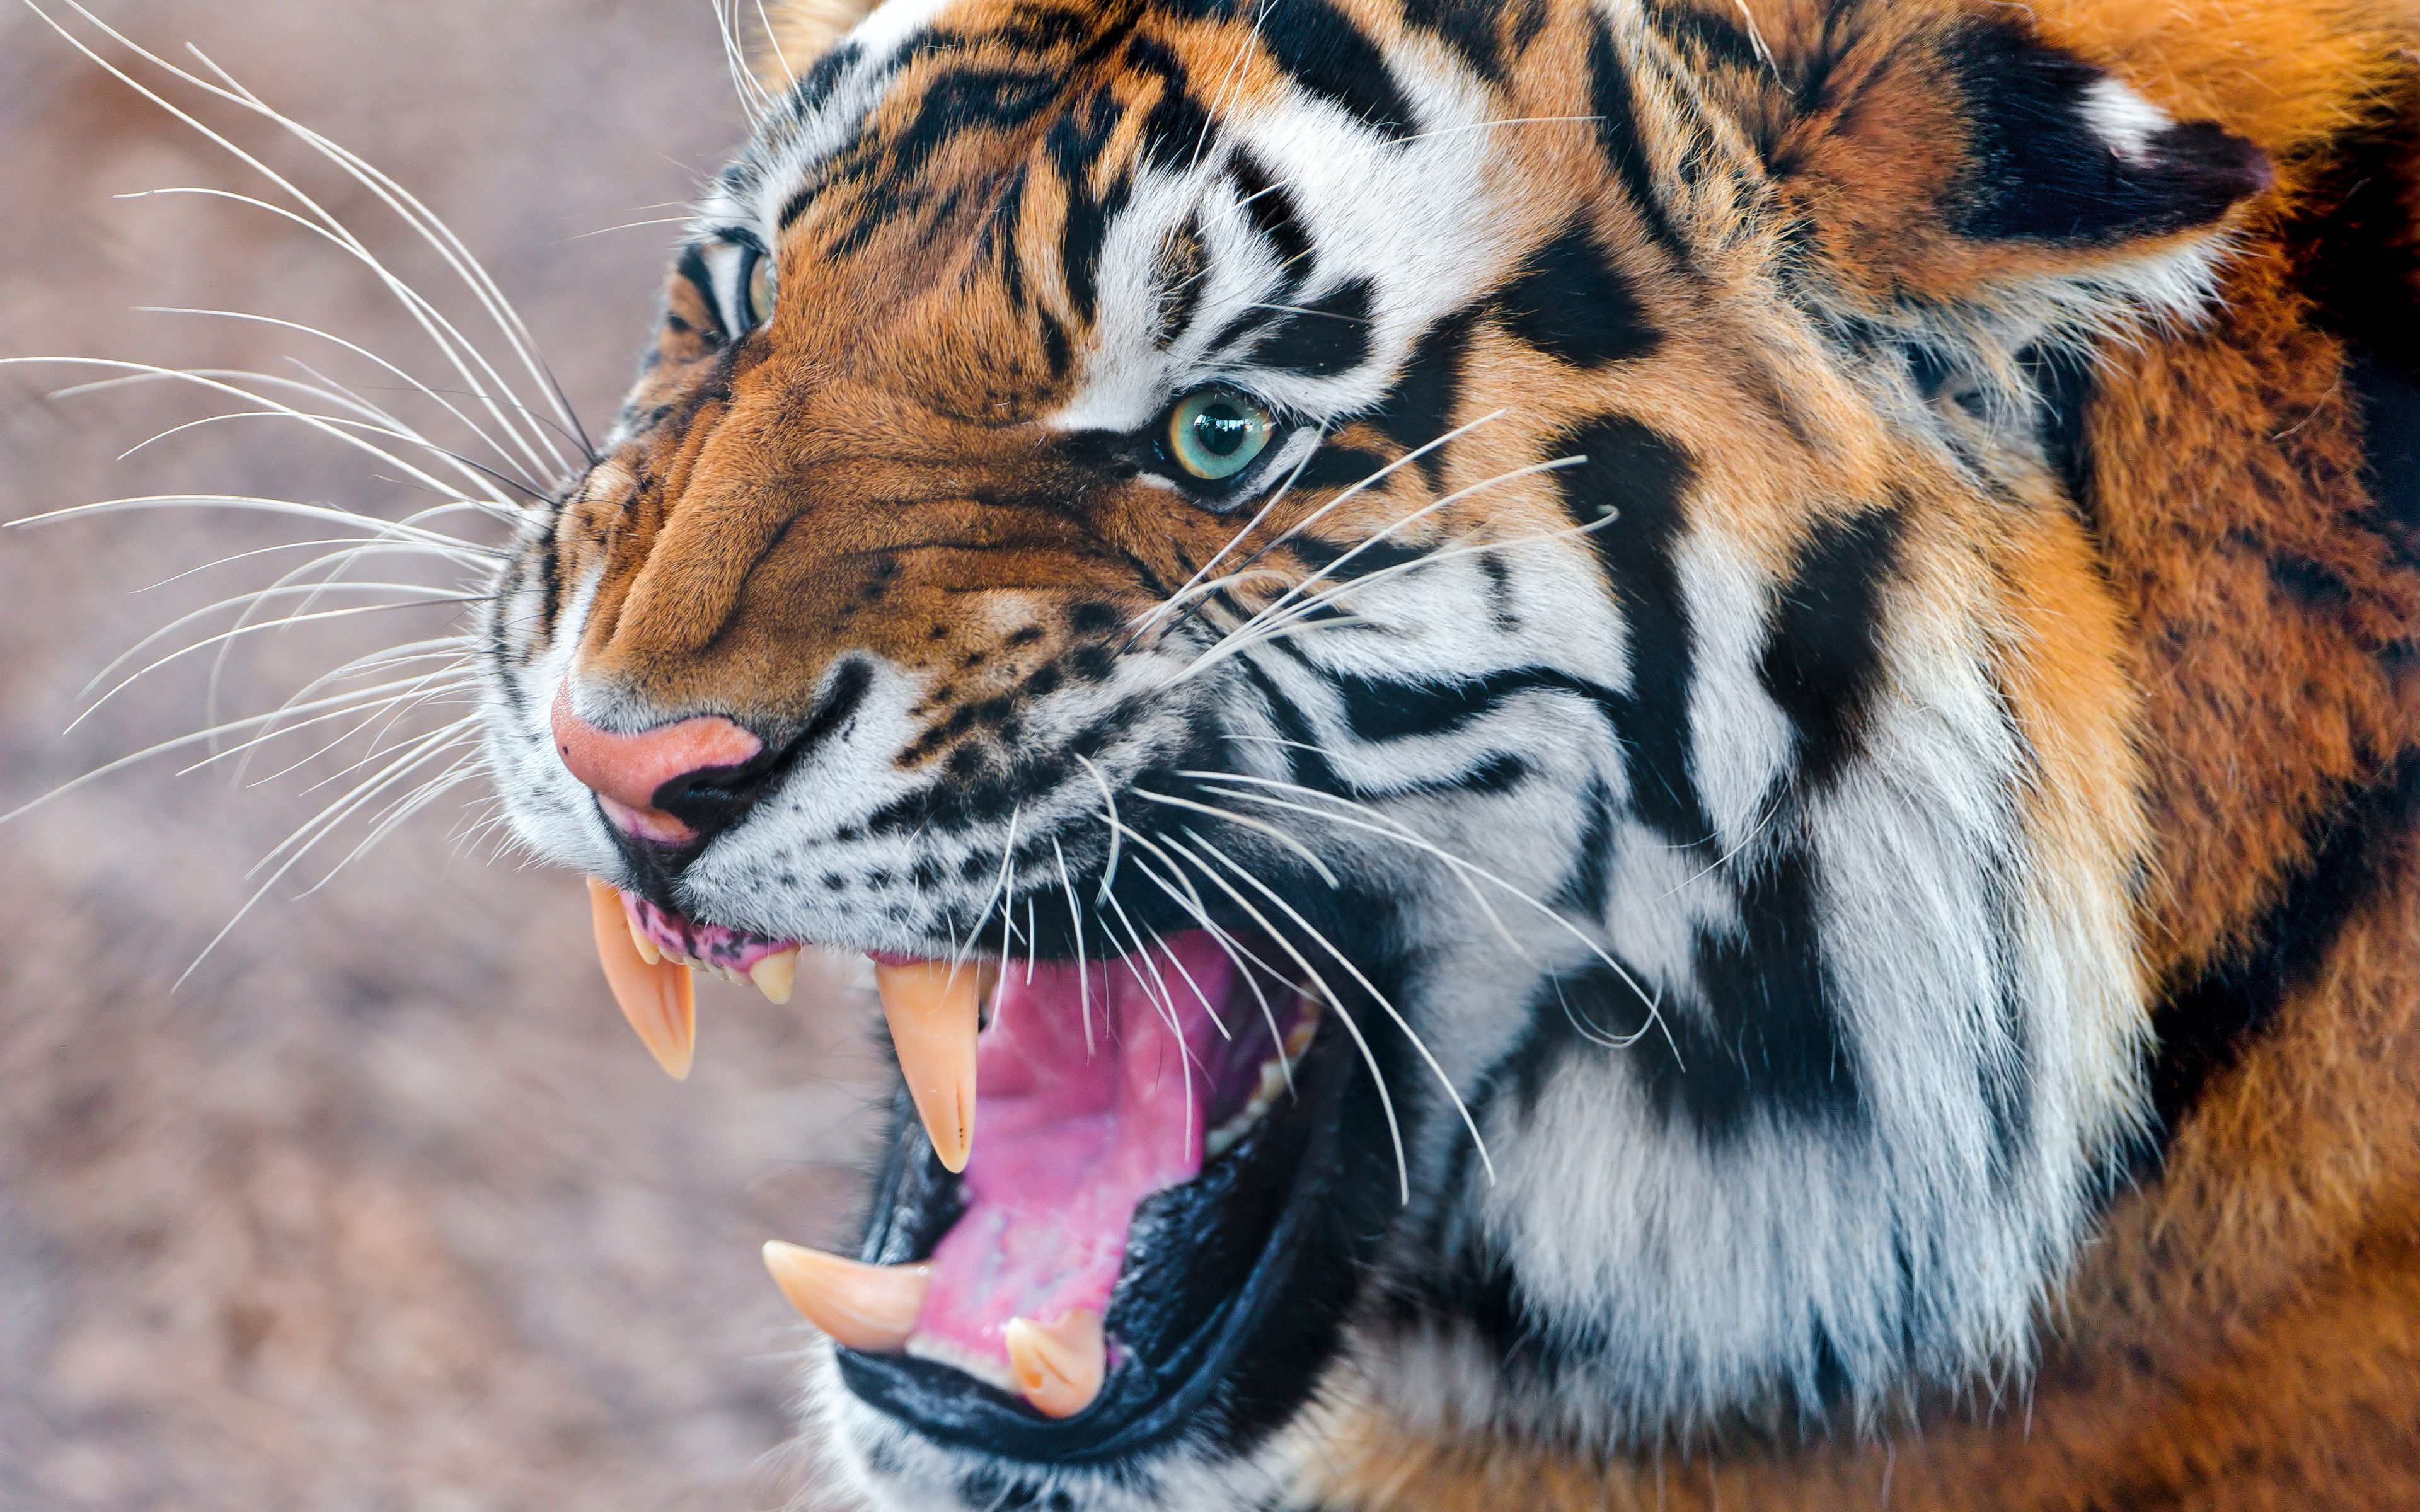 grin, tiger, animals, aggression, muzzle, anger